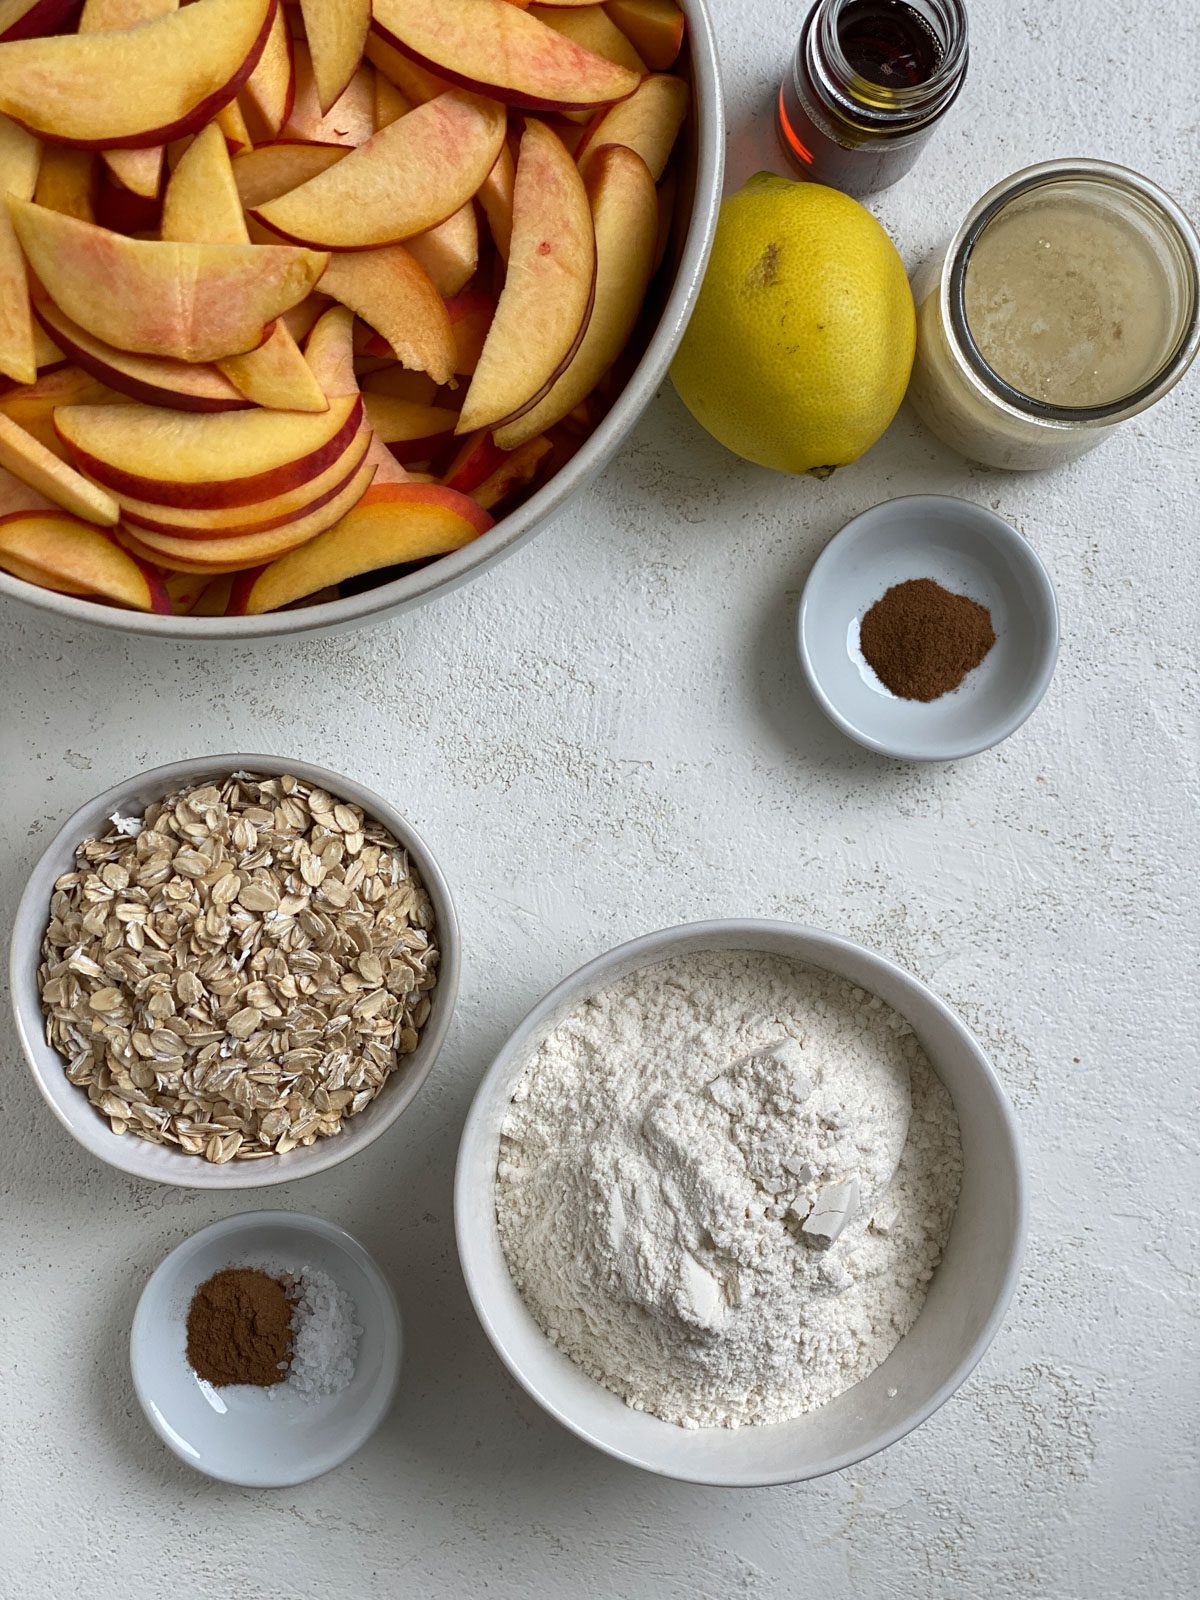 ingredients for Vegan Peach Crisp measured out against a white background